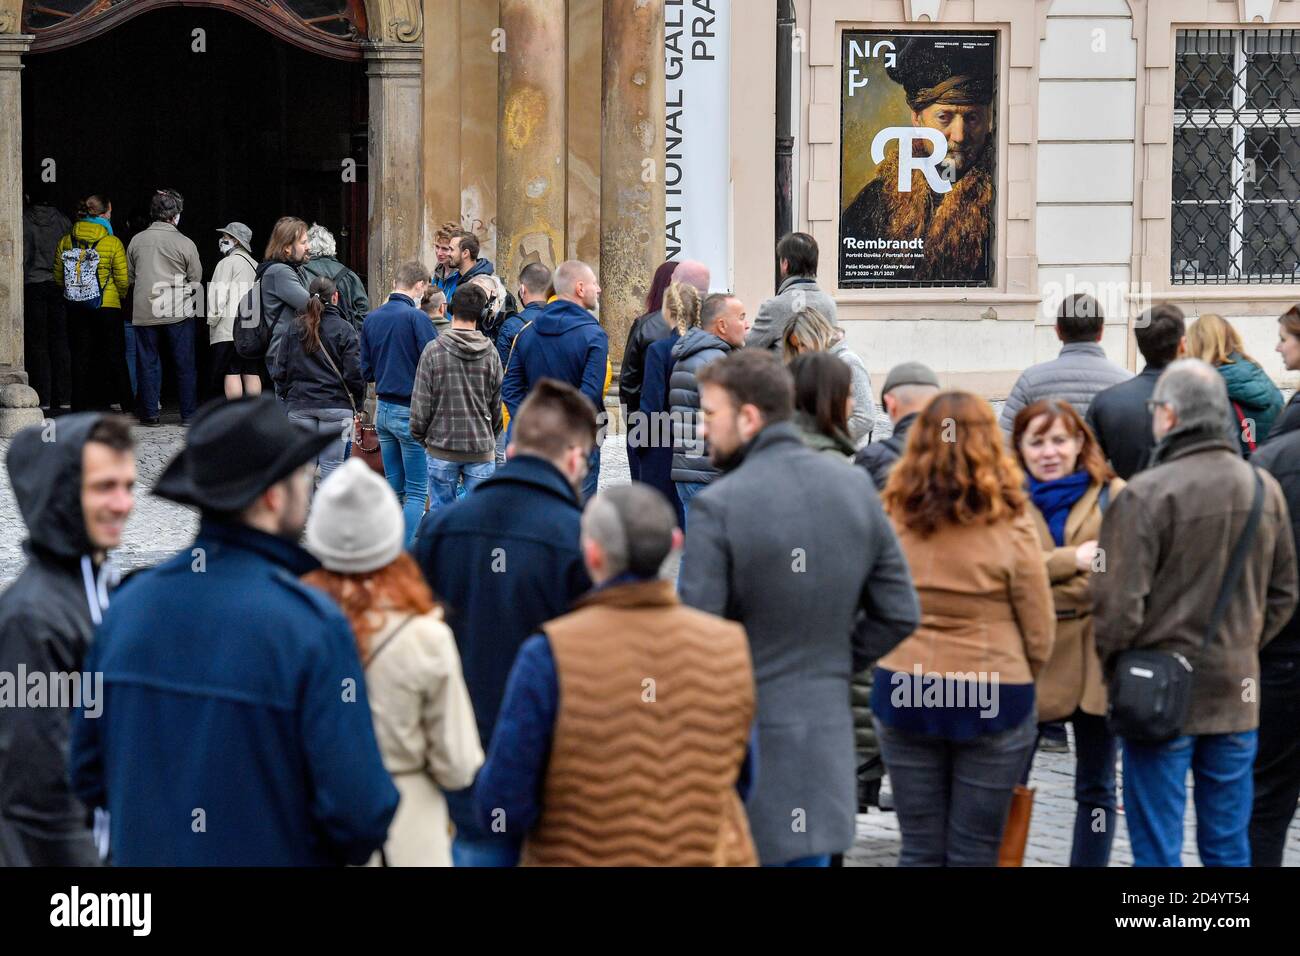 People stand queue for the exhibition of works by Rembrandt van Rijn (1606-1669), 'Rembrandt: Portrait of a Man', organising National Gallery (NGP) in the Kinsky Palace in Prague, on Sunday, October 11, 2020, prior its tomorrow's closing. The new measures against the novel coronavirus spread will take effect in the Czech Republic as of Wednesday, October 14 and the government will decide on them on Monday, Prime Minister Andrej Babis (ANO) said in his regular Sunday presentation on his Facebook profile today. The government decided on Thursday that heritage sights, theatres and cinemas, museum Stock Photo